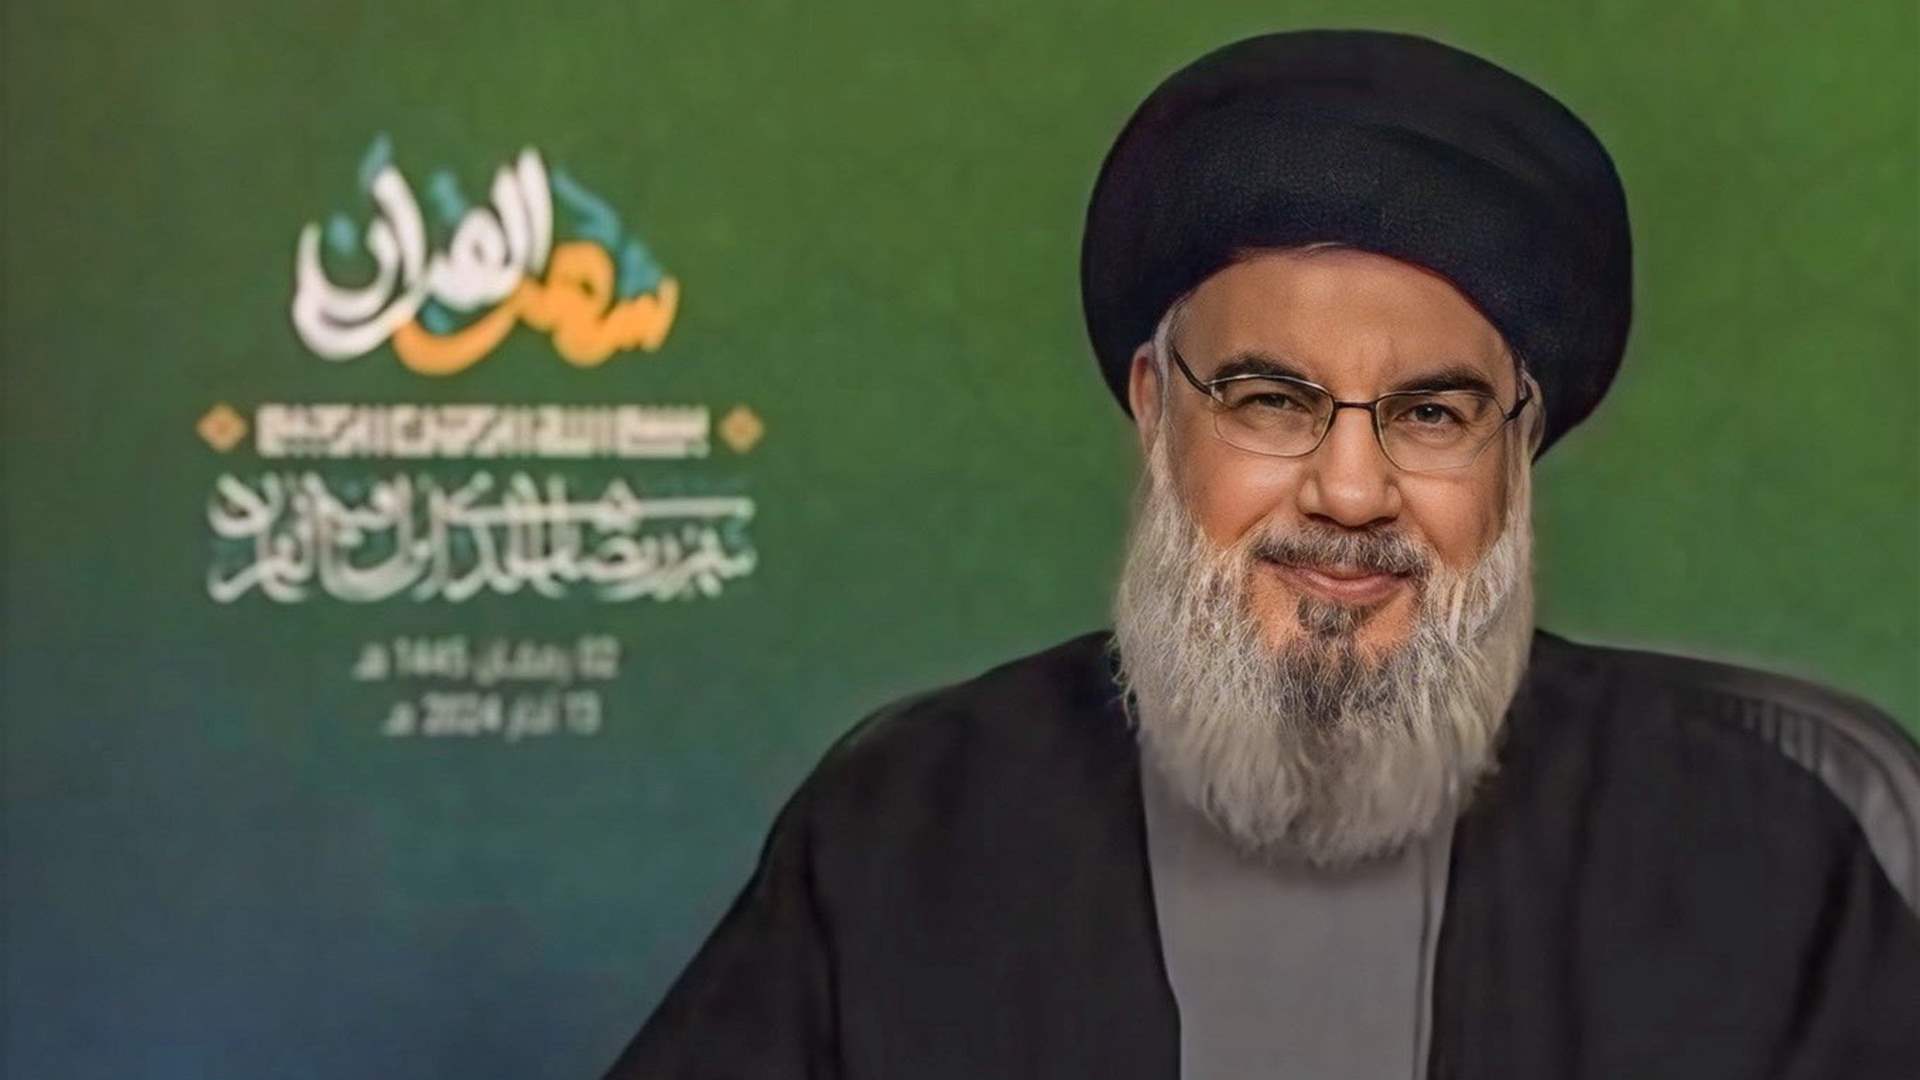 US can stop Gaza aggression; Palestinian factions united to end conflict: Hezbollah&#39;s Nasrallah says in televised speech